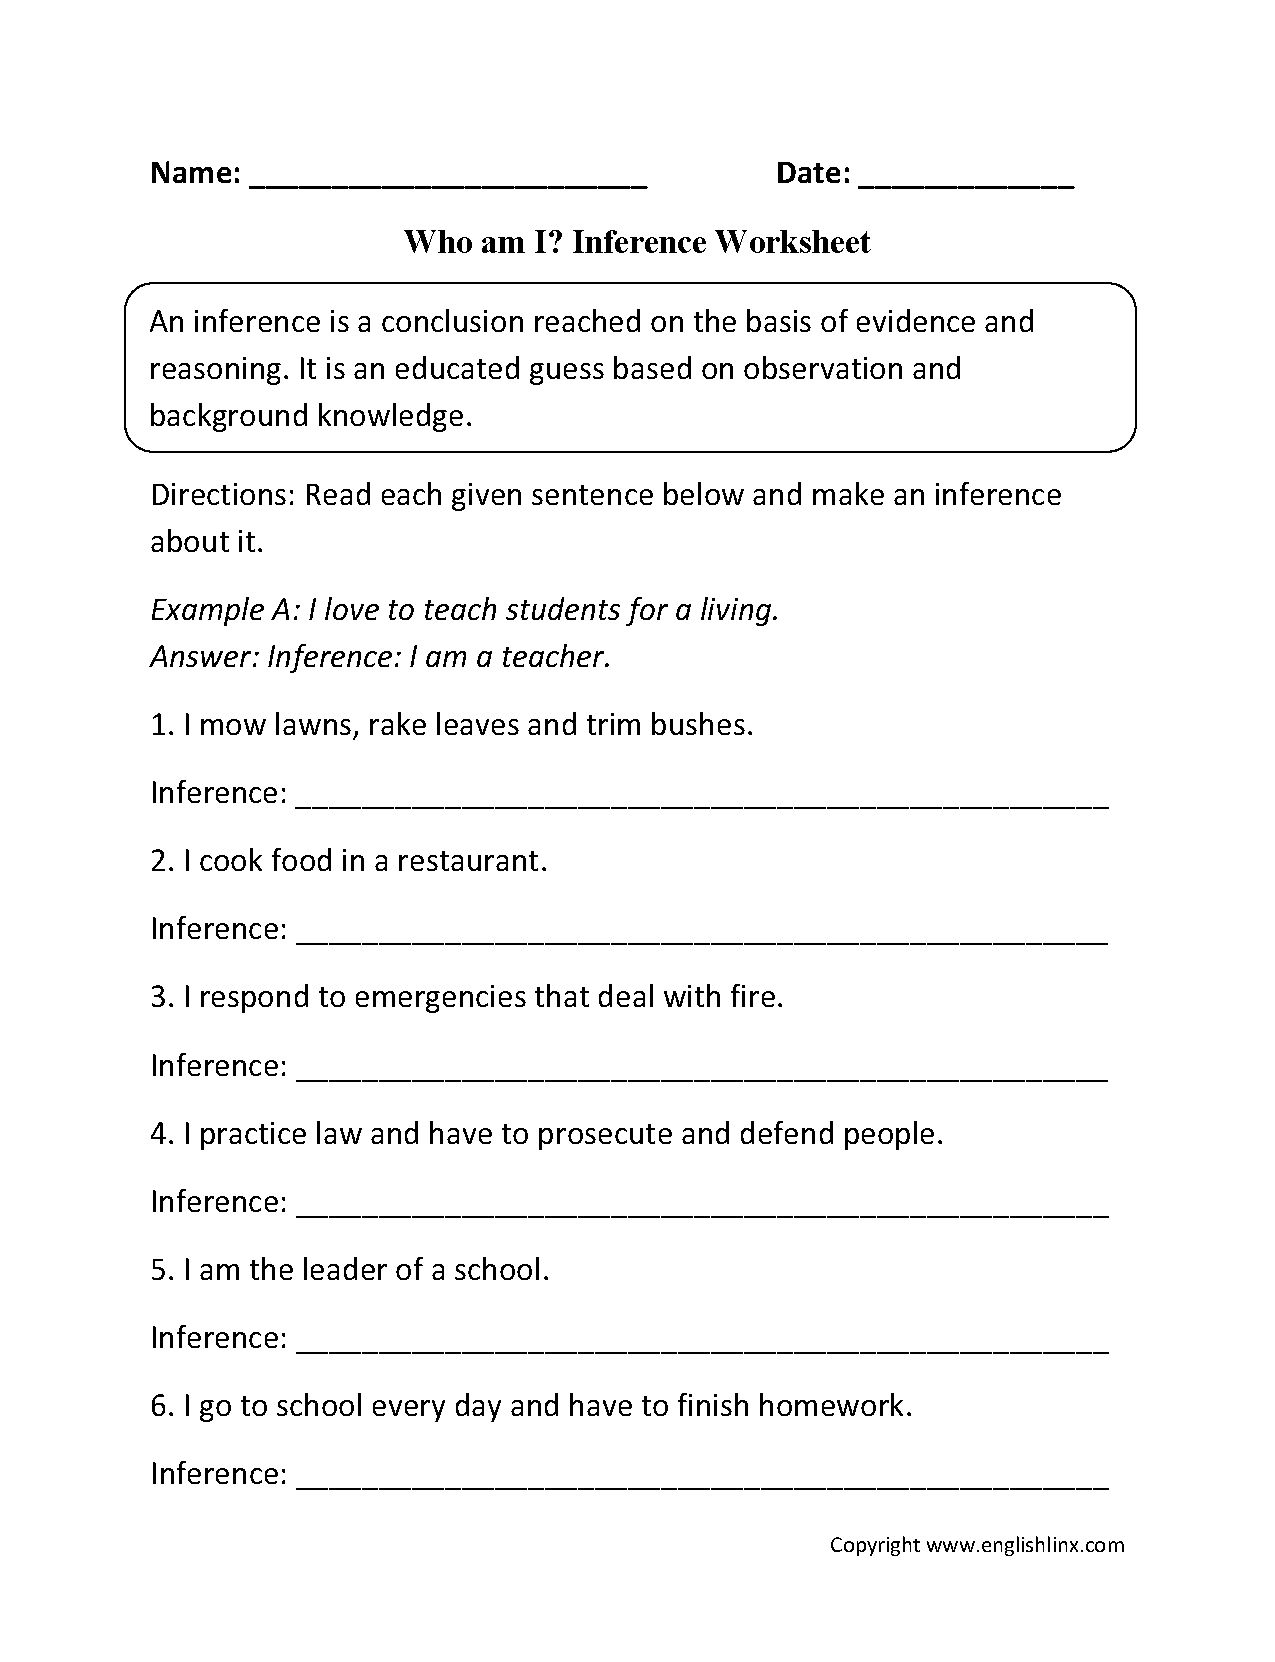 Who am I? Inference Worksheets